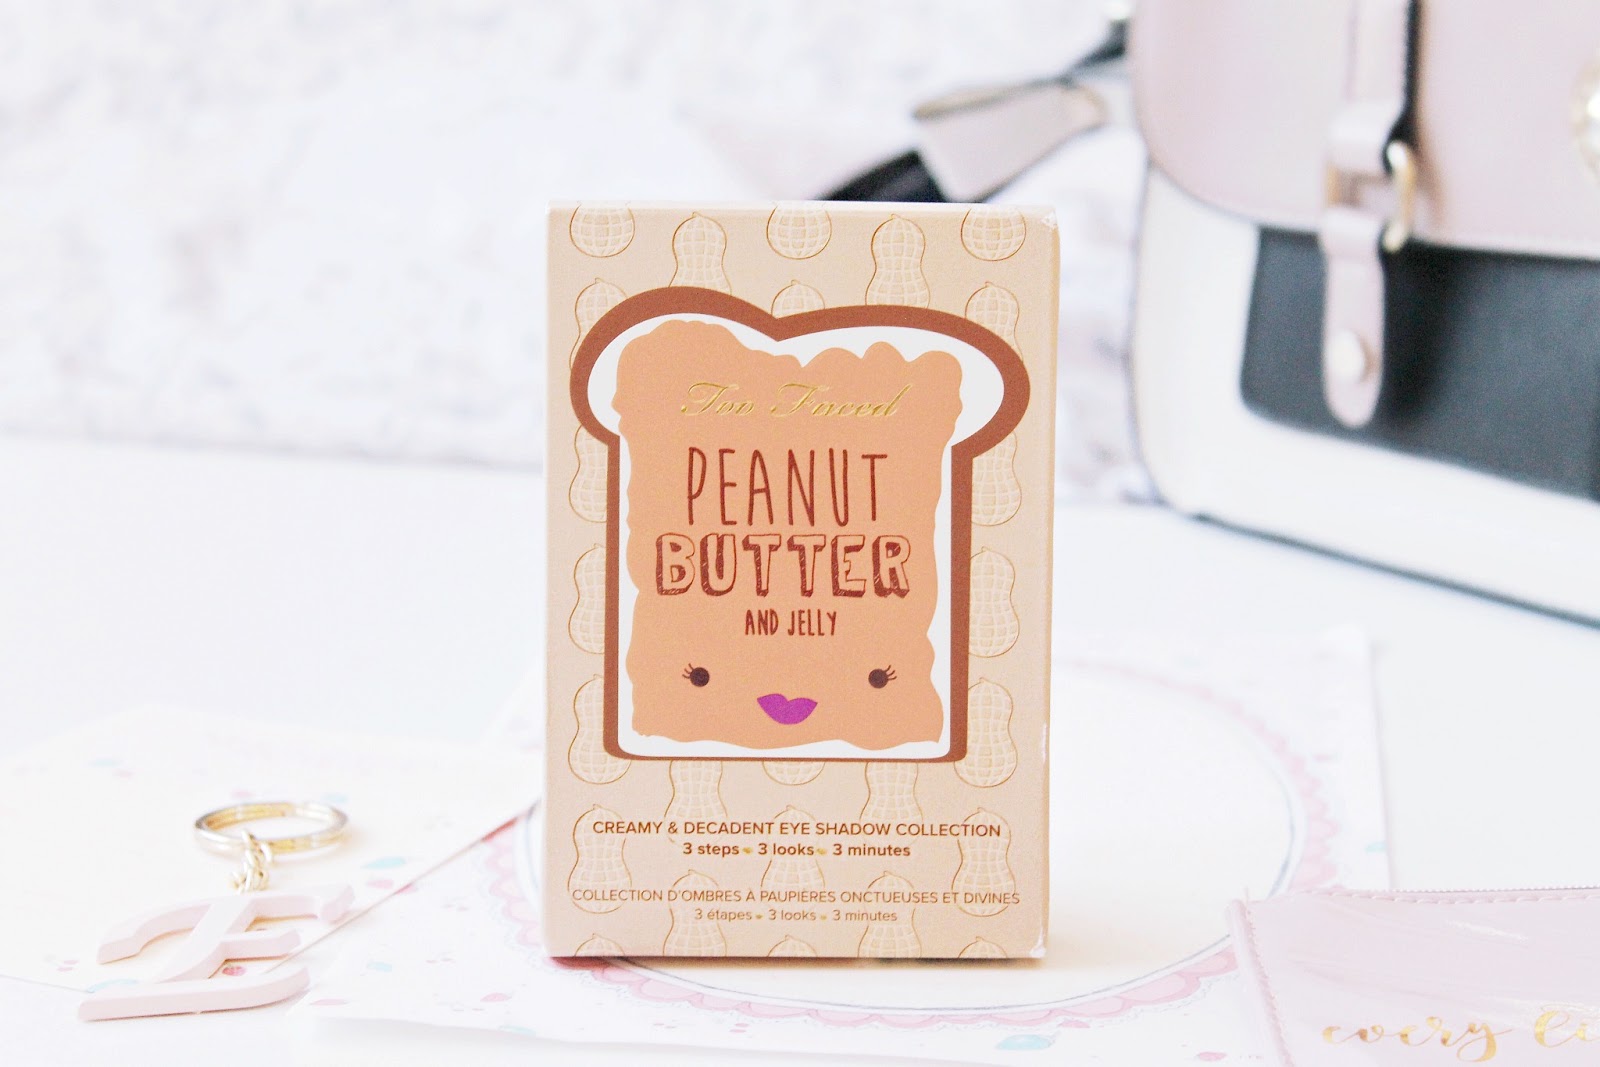 Too Faced Peanut Butter and Jelly palette review